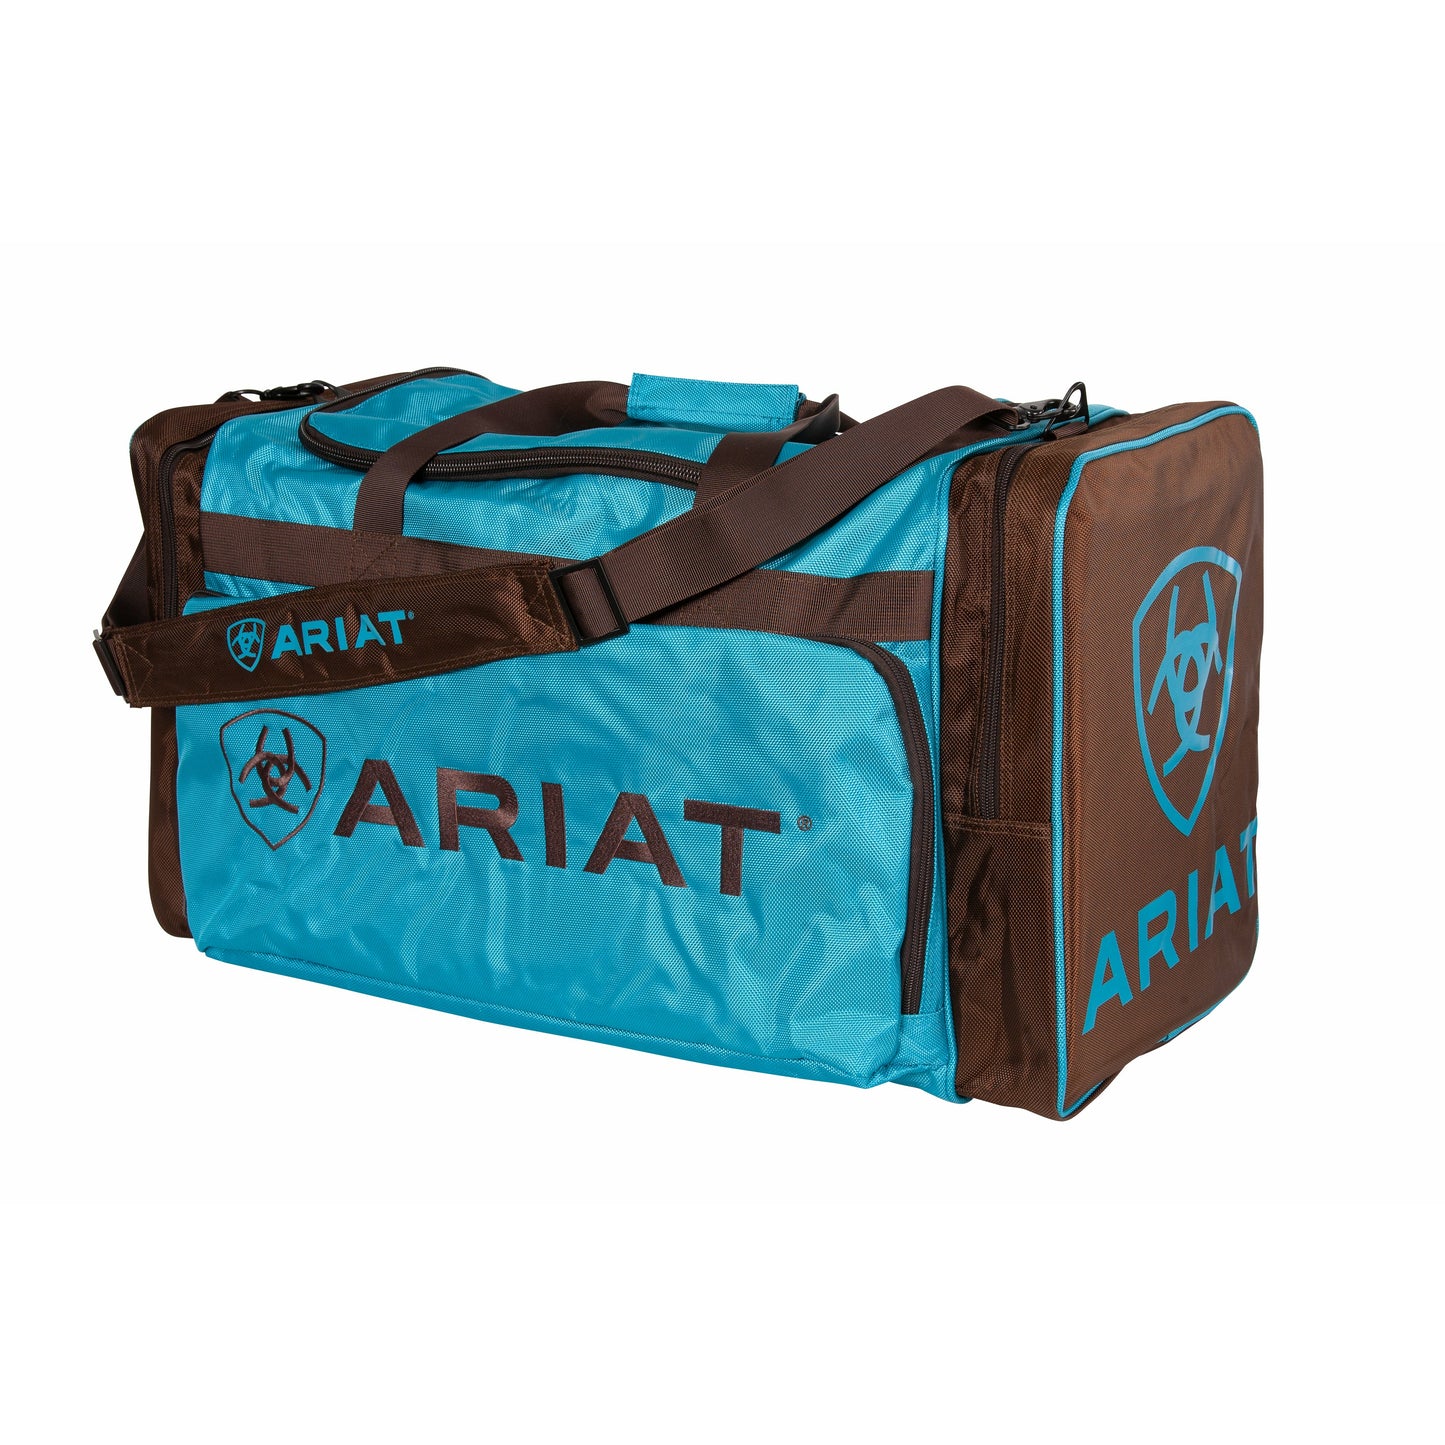 Ariat Gear Bag Turquoise/Brown